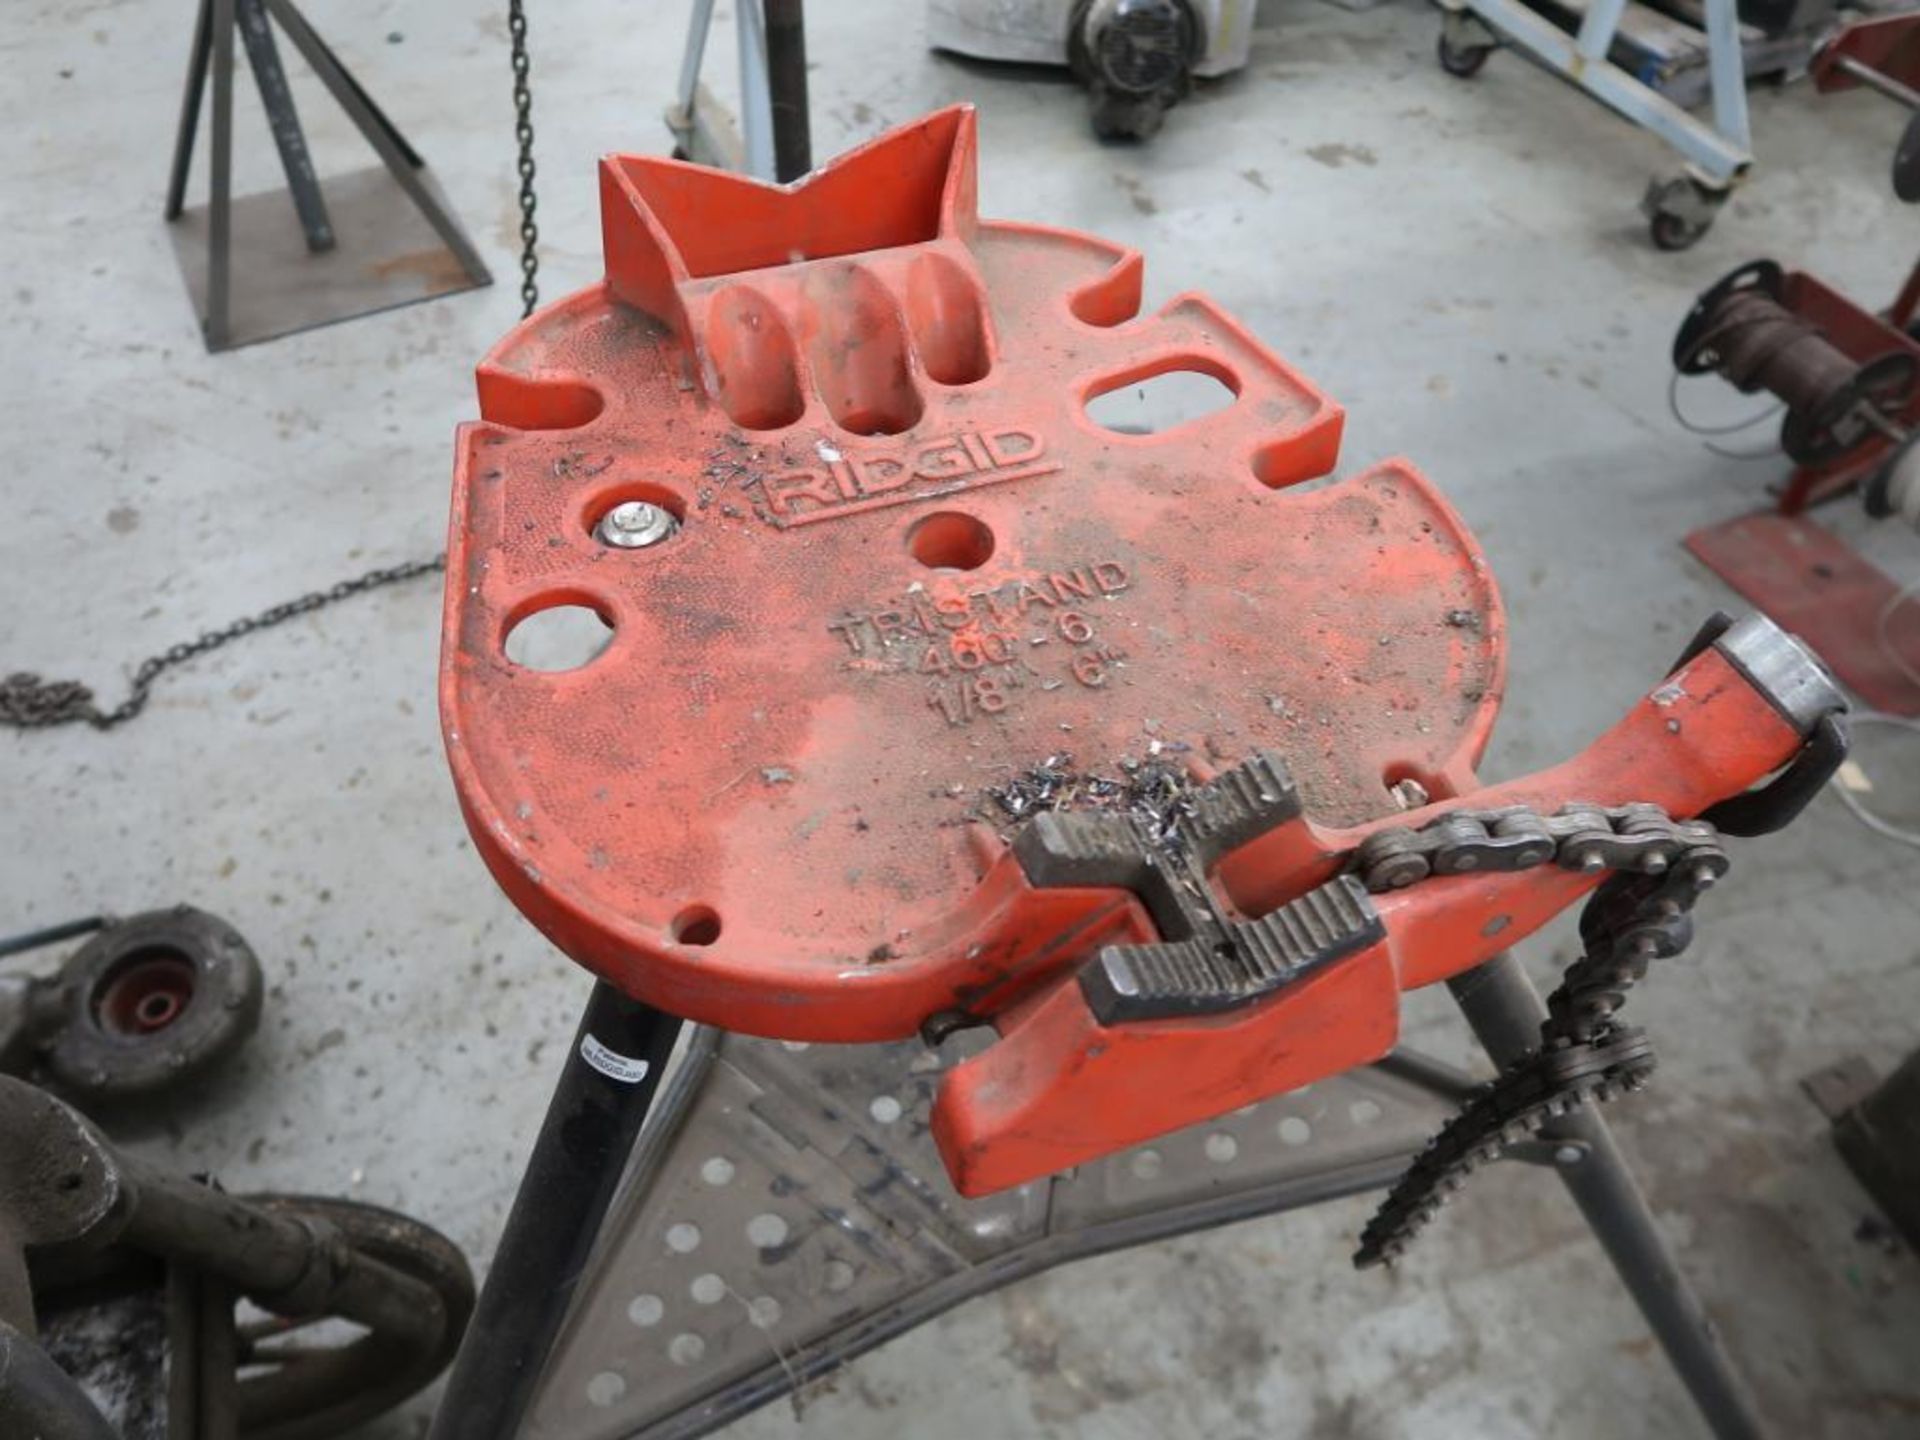 LOT: RIDGID Tri-Stand Model 460, with (2) Stands